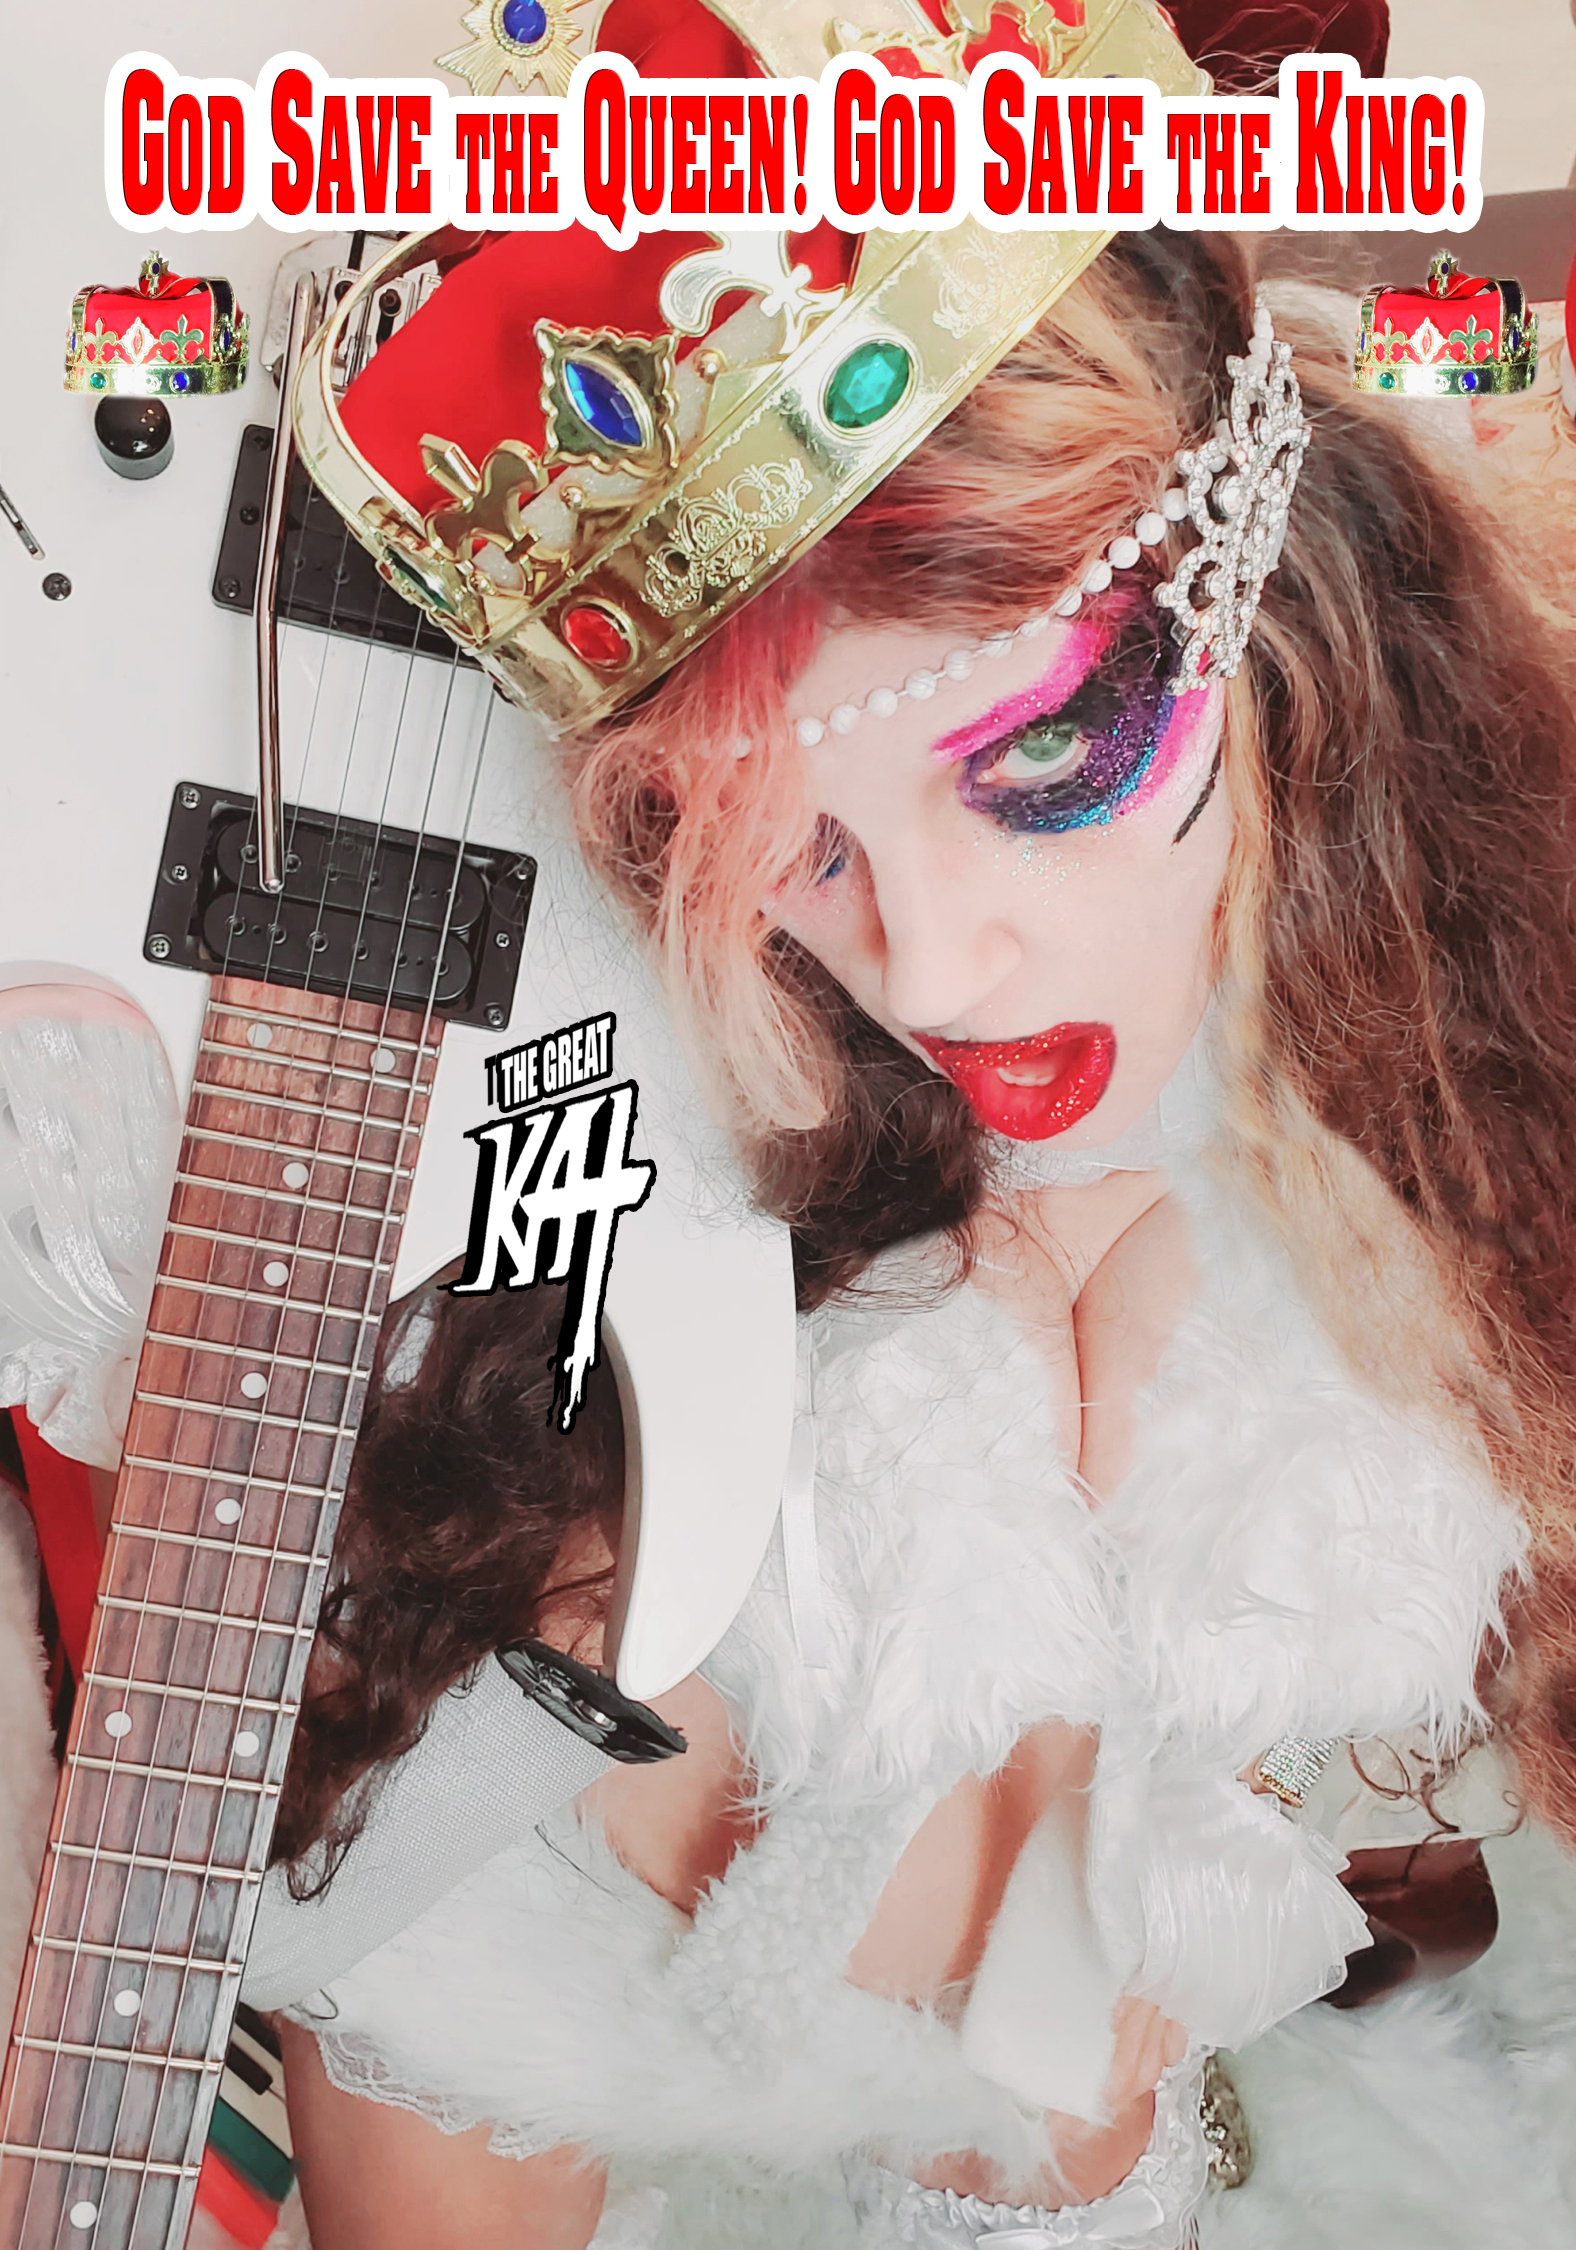 NEW �GOD SAVE THE QUEEN! GOD SAVE THE KING!� DVD 6-Music Video (10 Min)! PERSONALIZED AUTOGRAPHED by GREAT KAT (To Customer)! 6 Music Videos "God Save The Queen Guitar", "God Save The King" & more http://store10552072.company.site/shared-products/493742003 